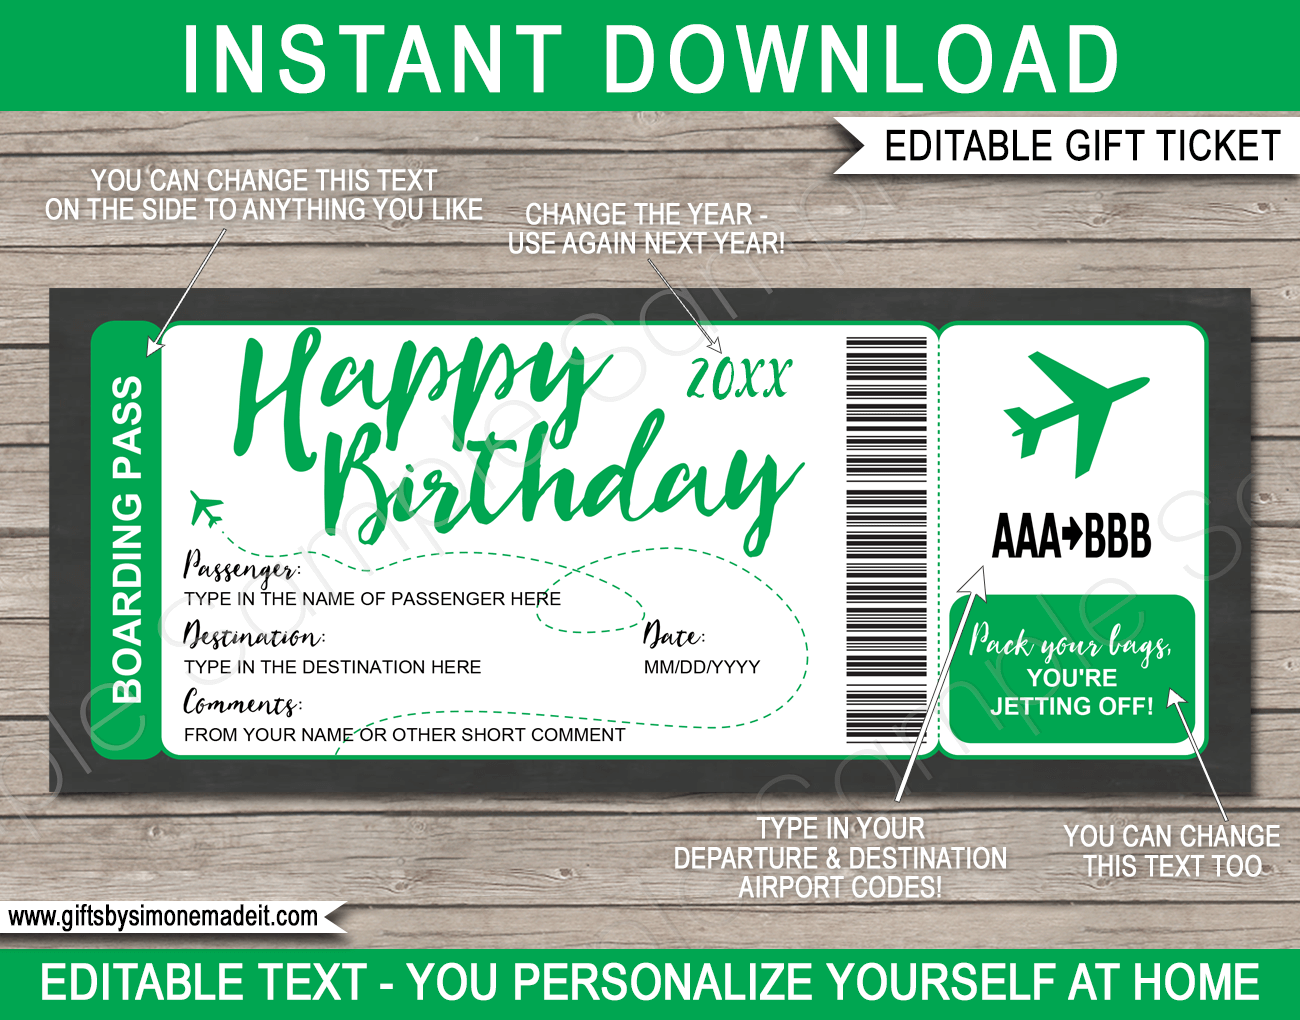 Printable Green Birthday Surprise Trip Boarding Pass Template | Fake Plane Ticket Gift | Surprise Birthday Trip Reveal | Flight, Holiday, Getaway, Vacation | INSTANT DOWNLOAD via giftsbysimonemadeit.com